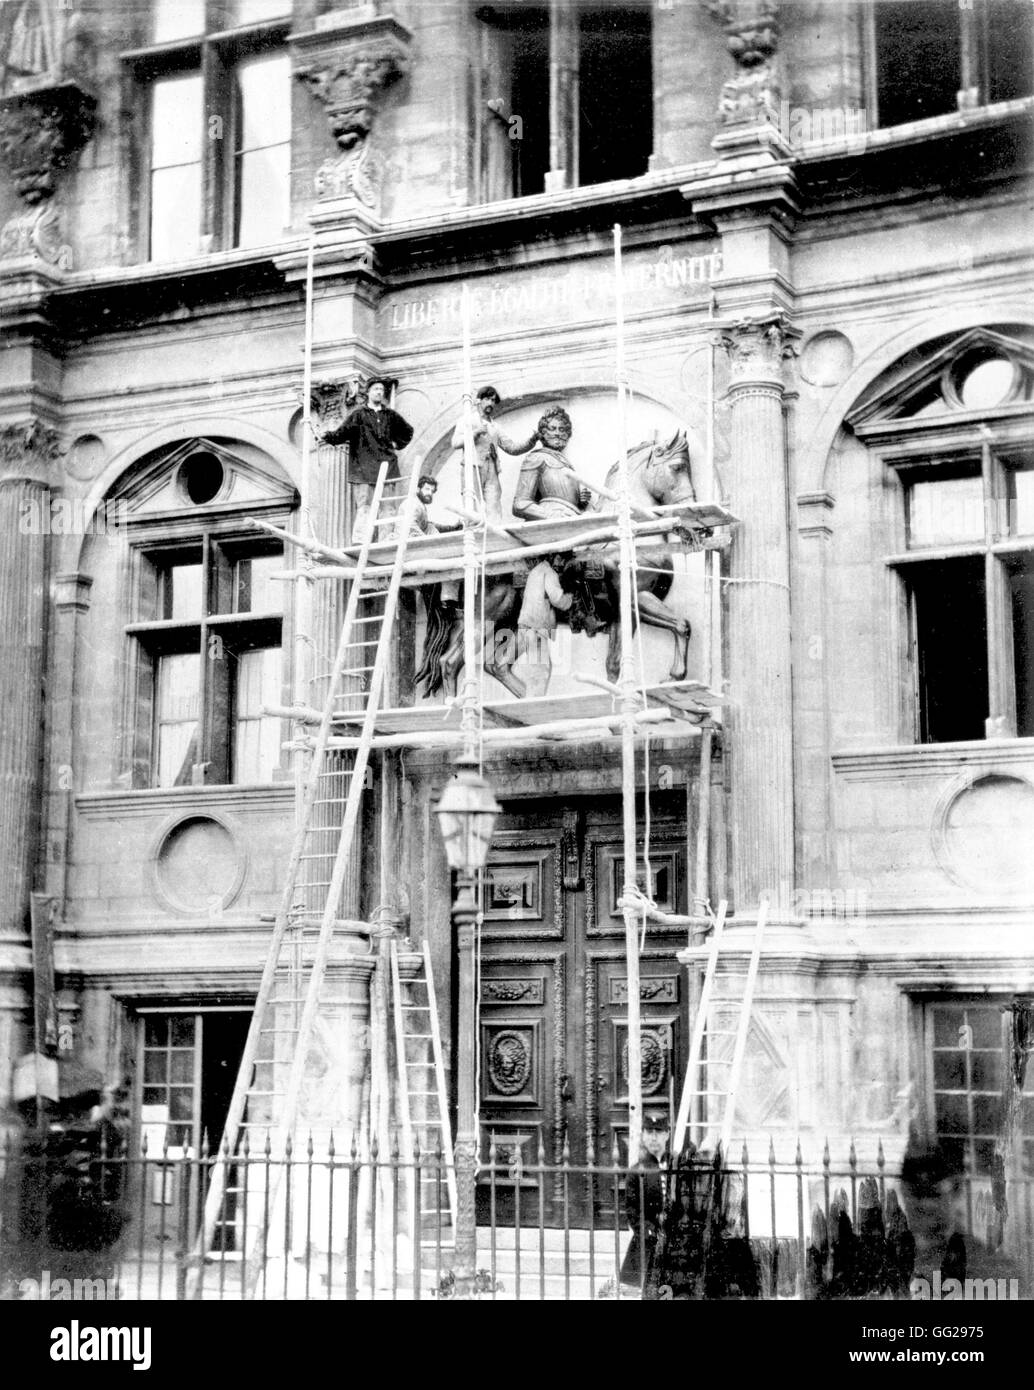 Paris. Demolition of the statue of Henri IV in front of the Townhall façade 1871 France - Paris Commune Stock Photo